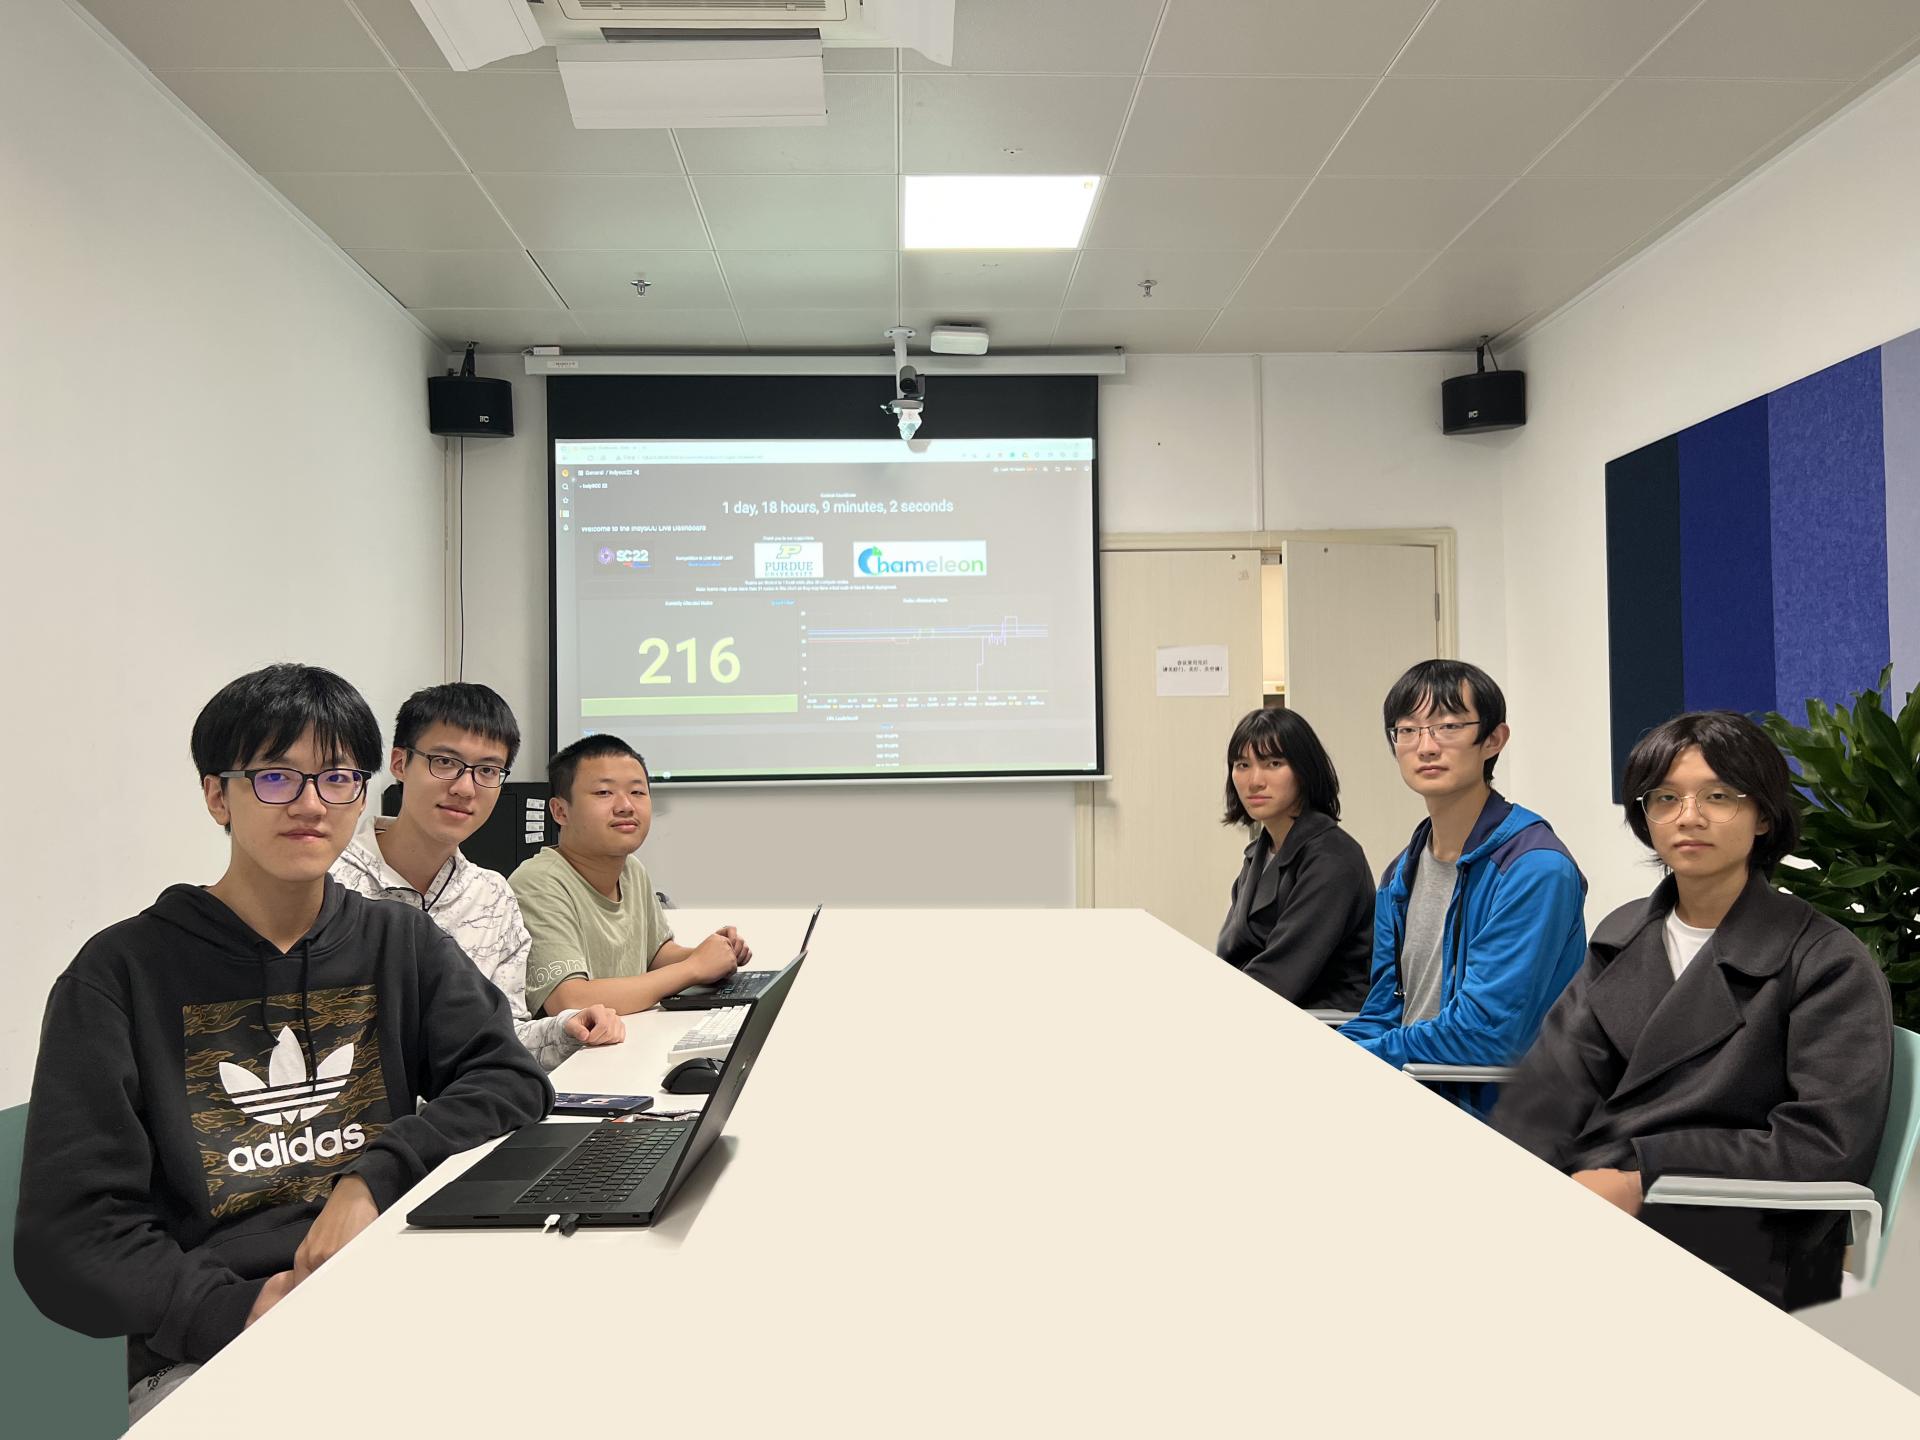 SUSTech’s Undergraduate Supercomputing Team place second in IndySCC22 competition